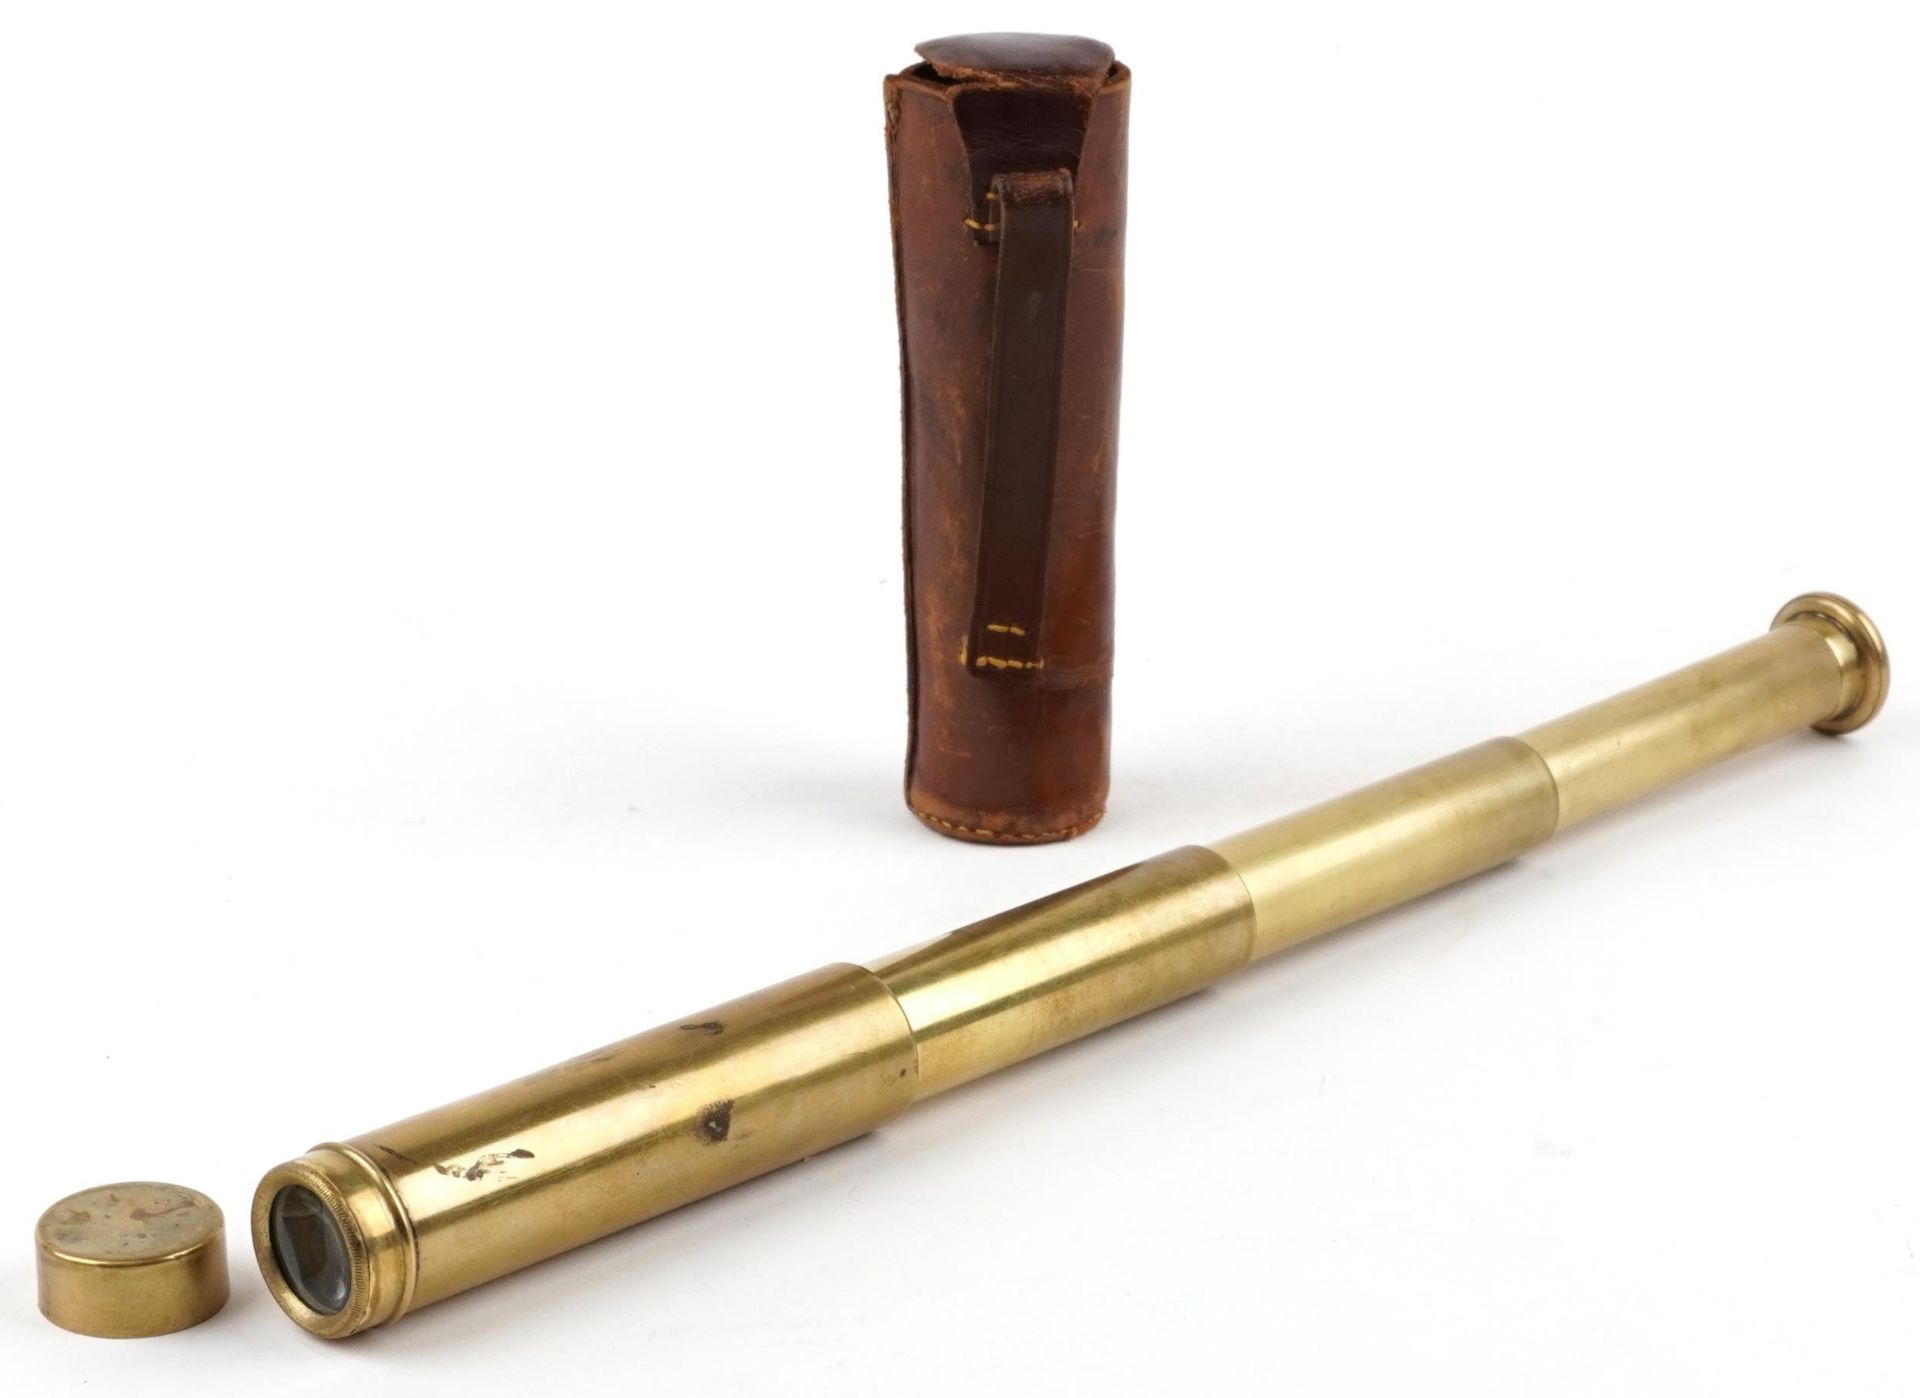 Military interest three draw brass telescope with leather case : For further information on this lot